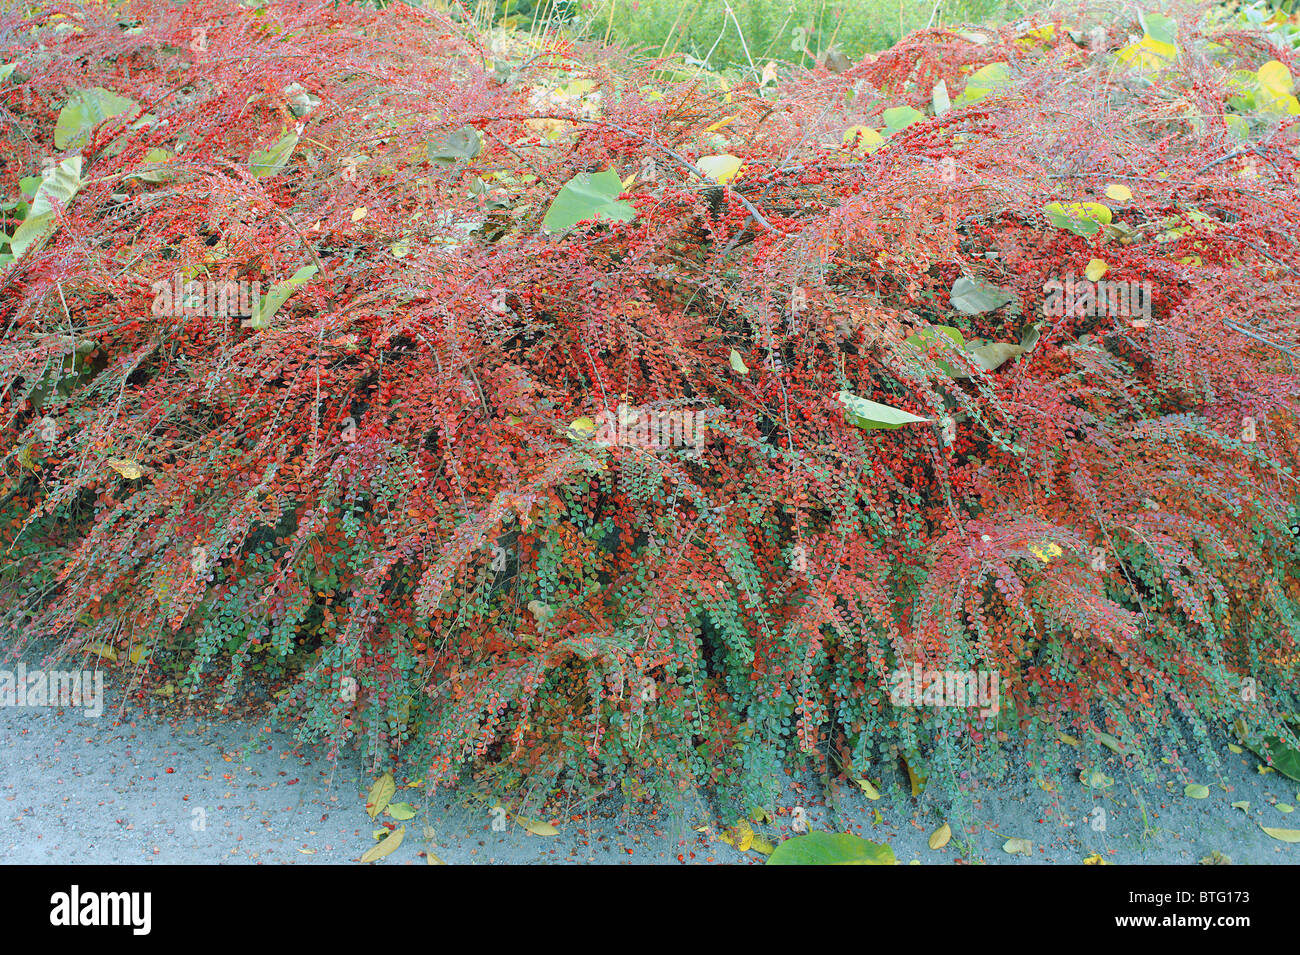 Cotoneaster shrub red berries and leaves at fall in autumn Cotoneaster horizontalis Stock Photo